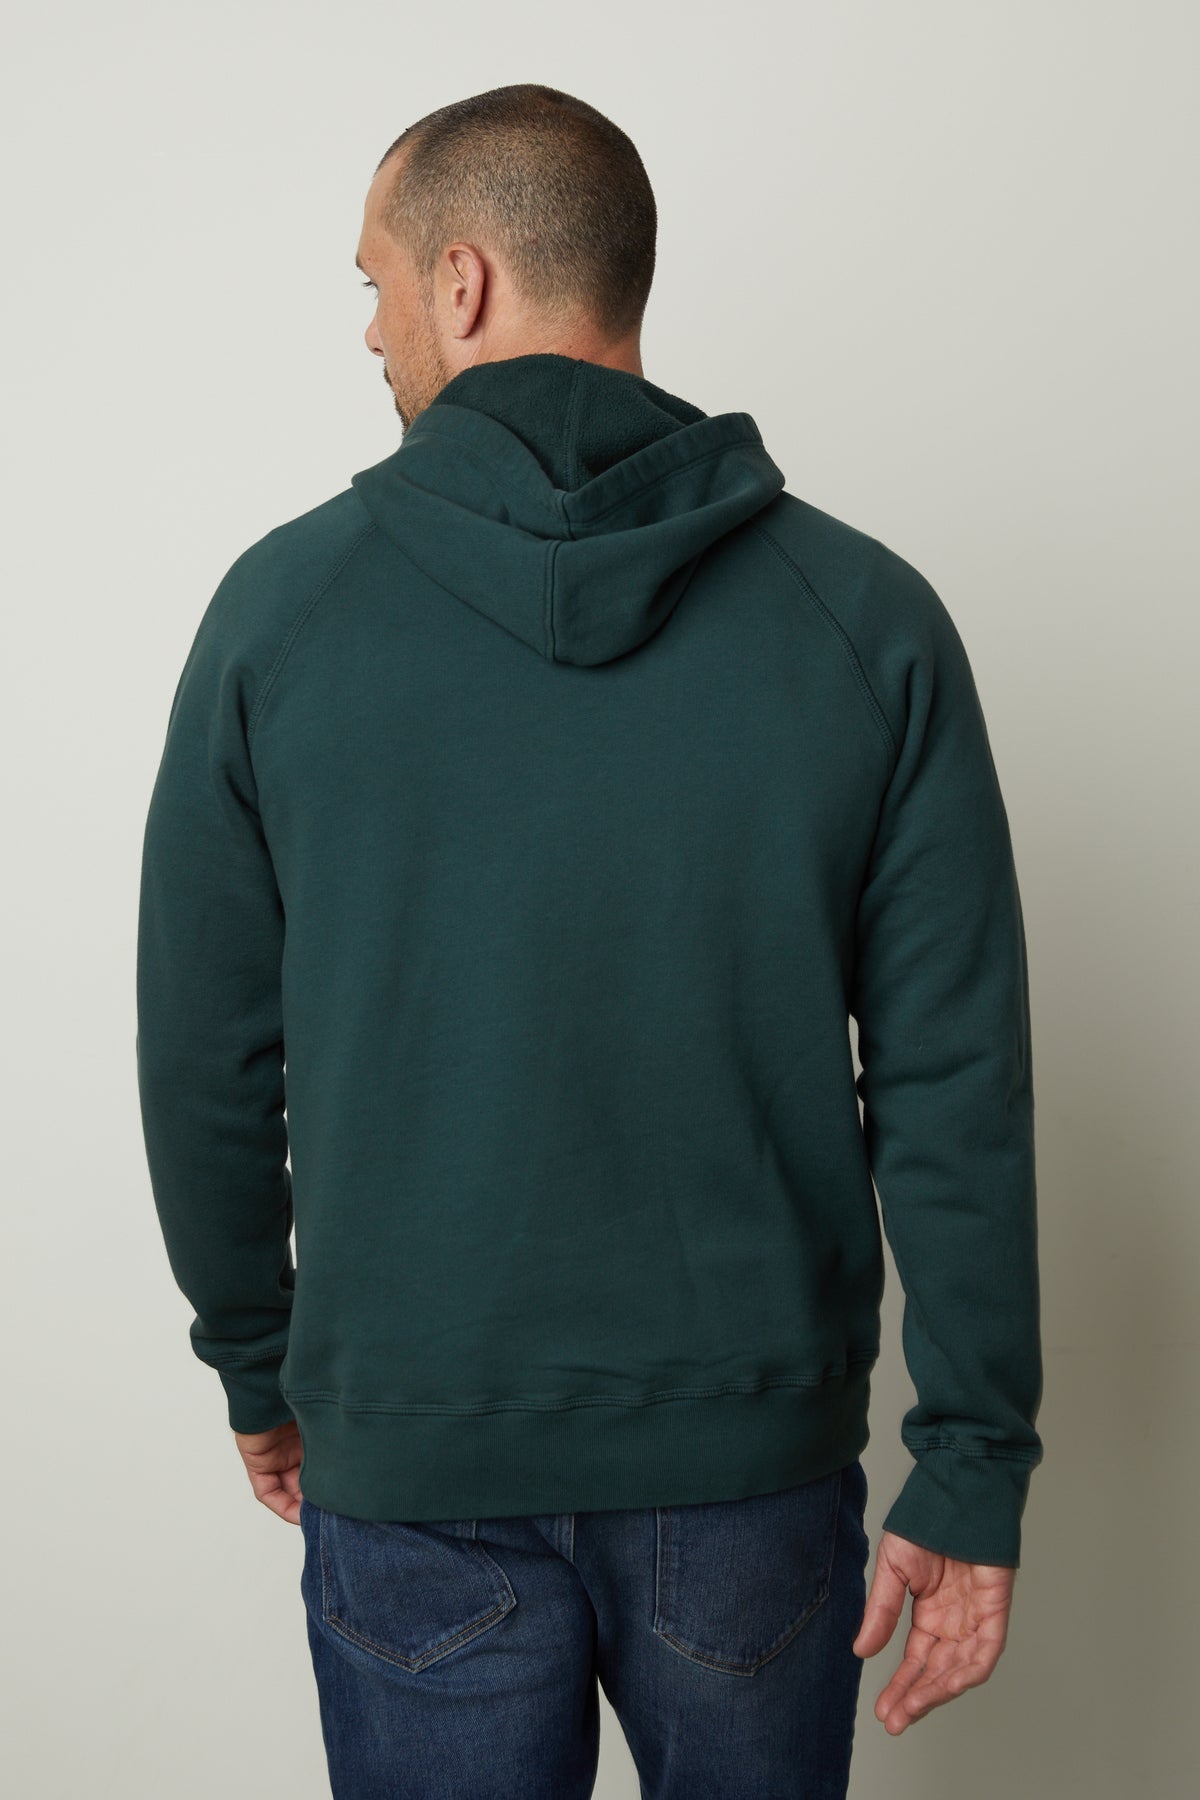   The back view of a man experiencing superior comfort in a Velvet by Graham & Spencer HOPKIN PULLOVER HOODIE. 